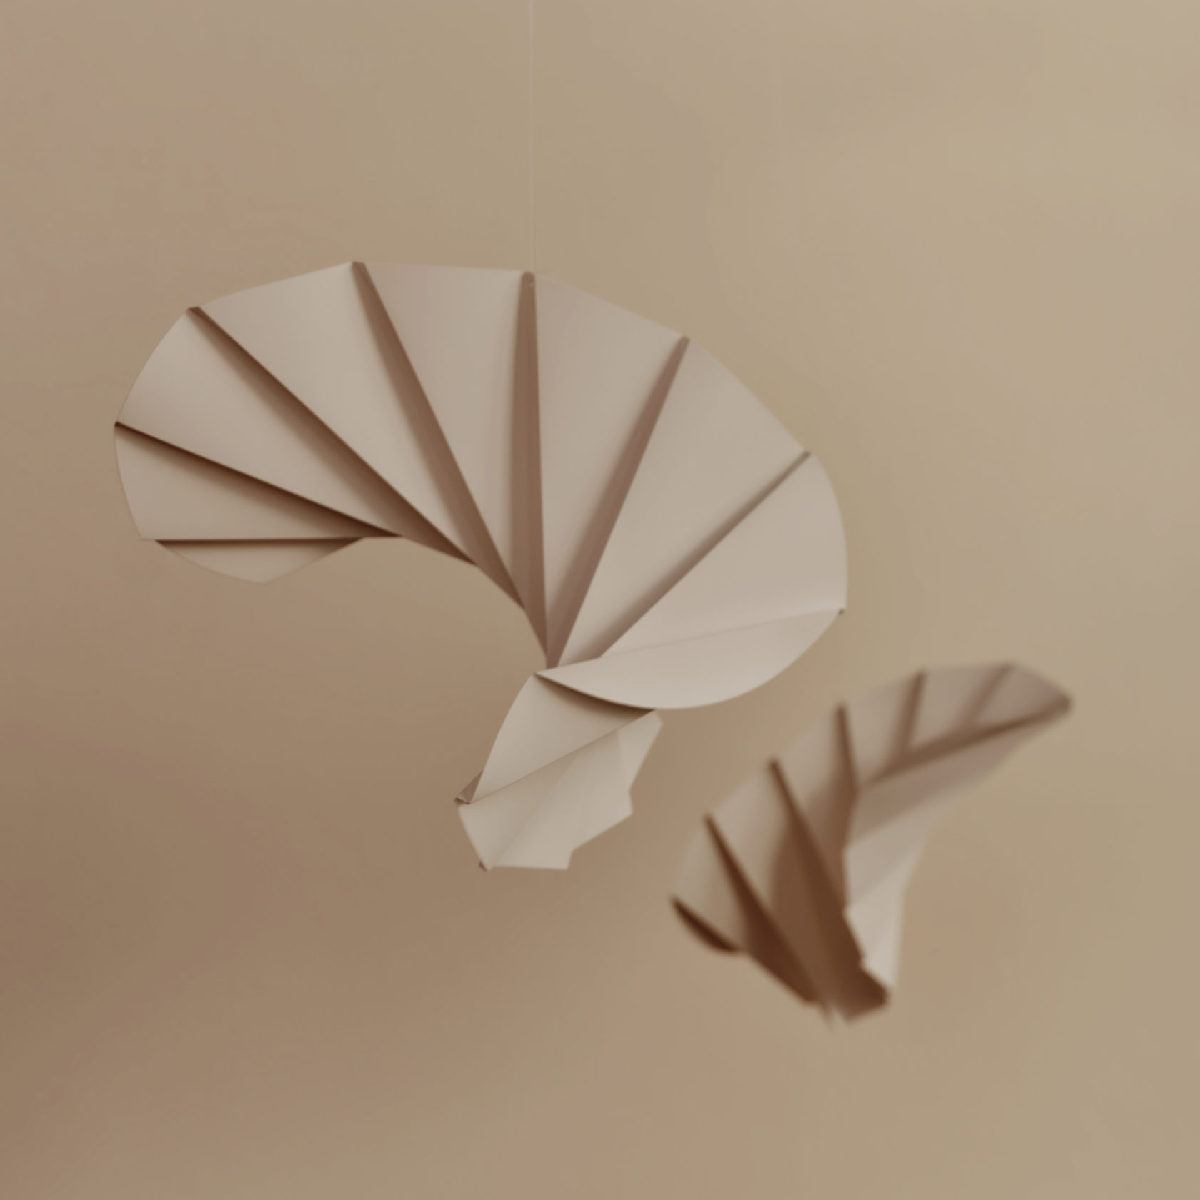 Geometrical Mobile "Waves" with White Elements (two sizes)